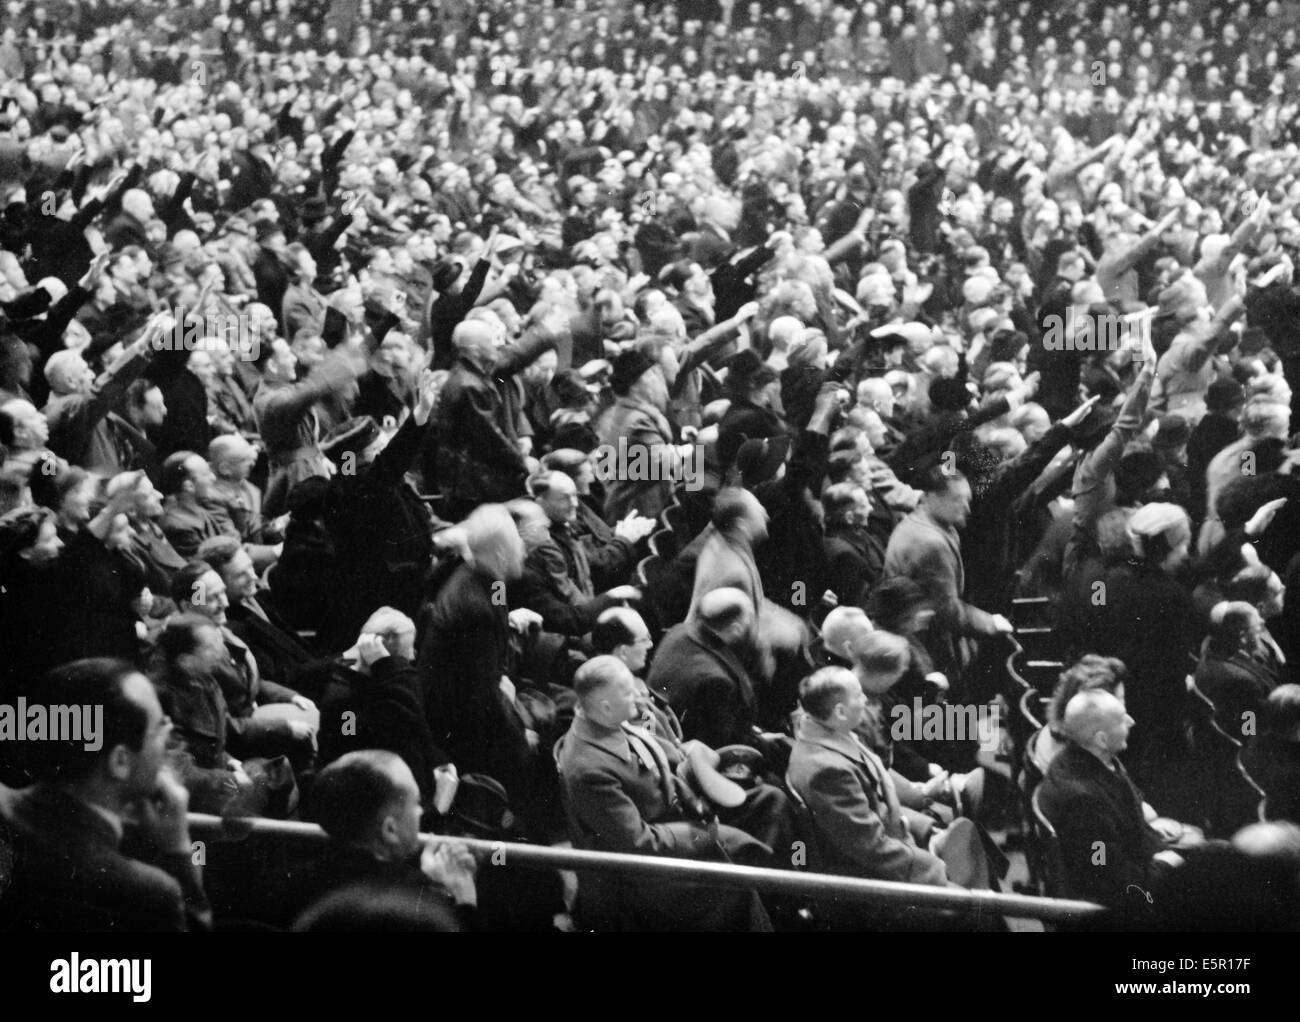 Image result for Nazi rally on 18 February 1943 at the Berlin Sportpalast